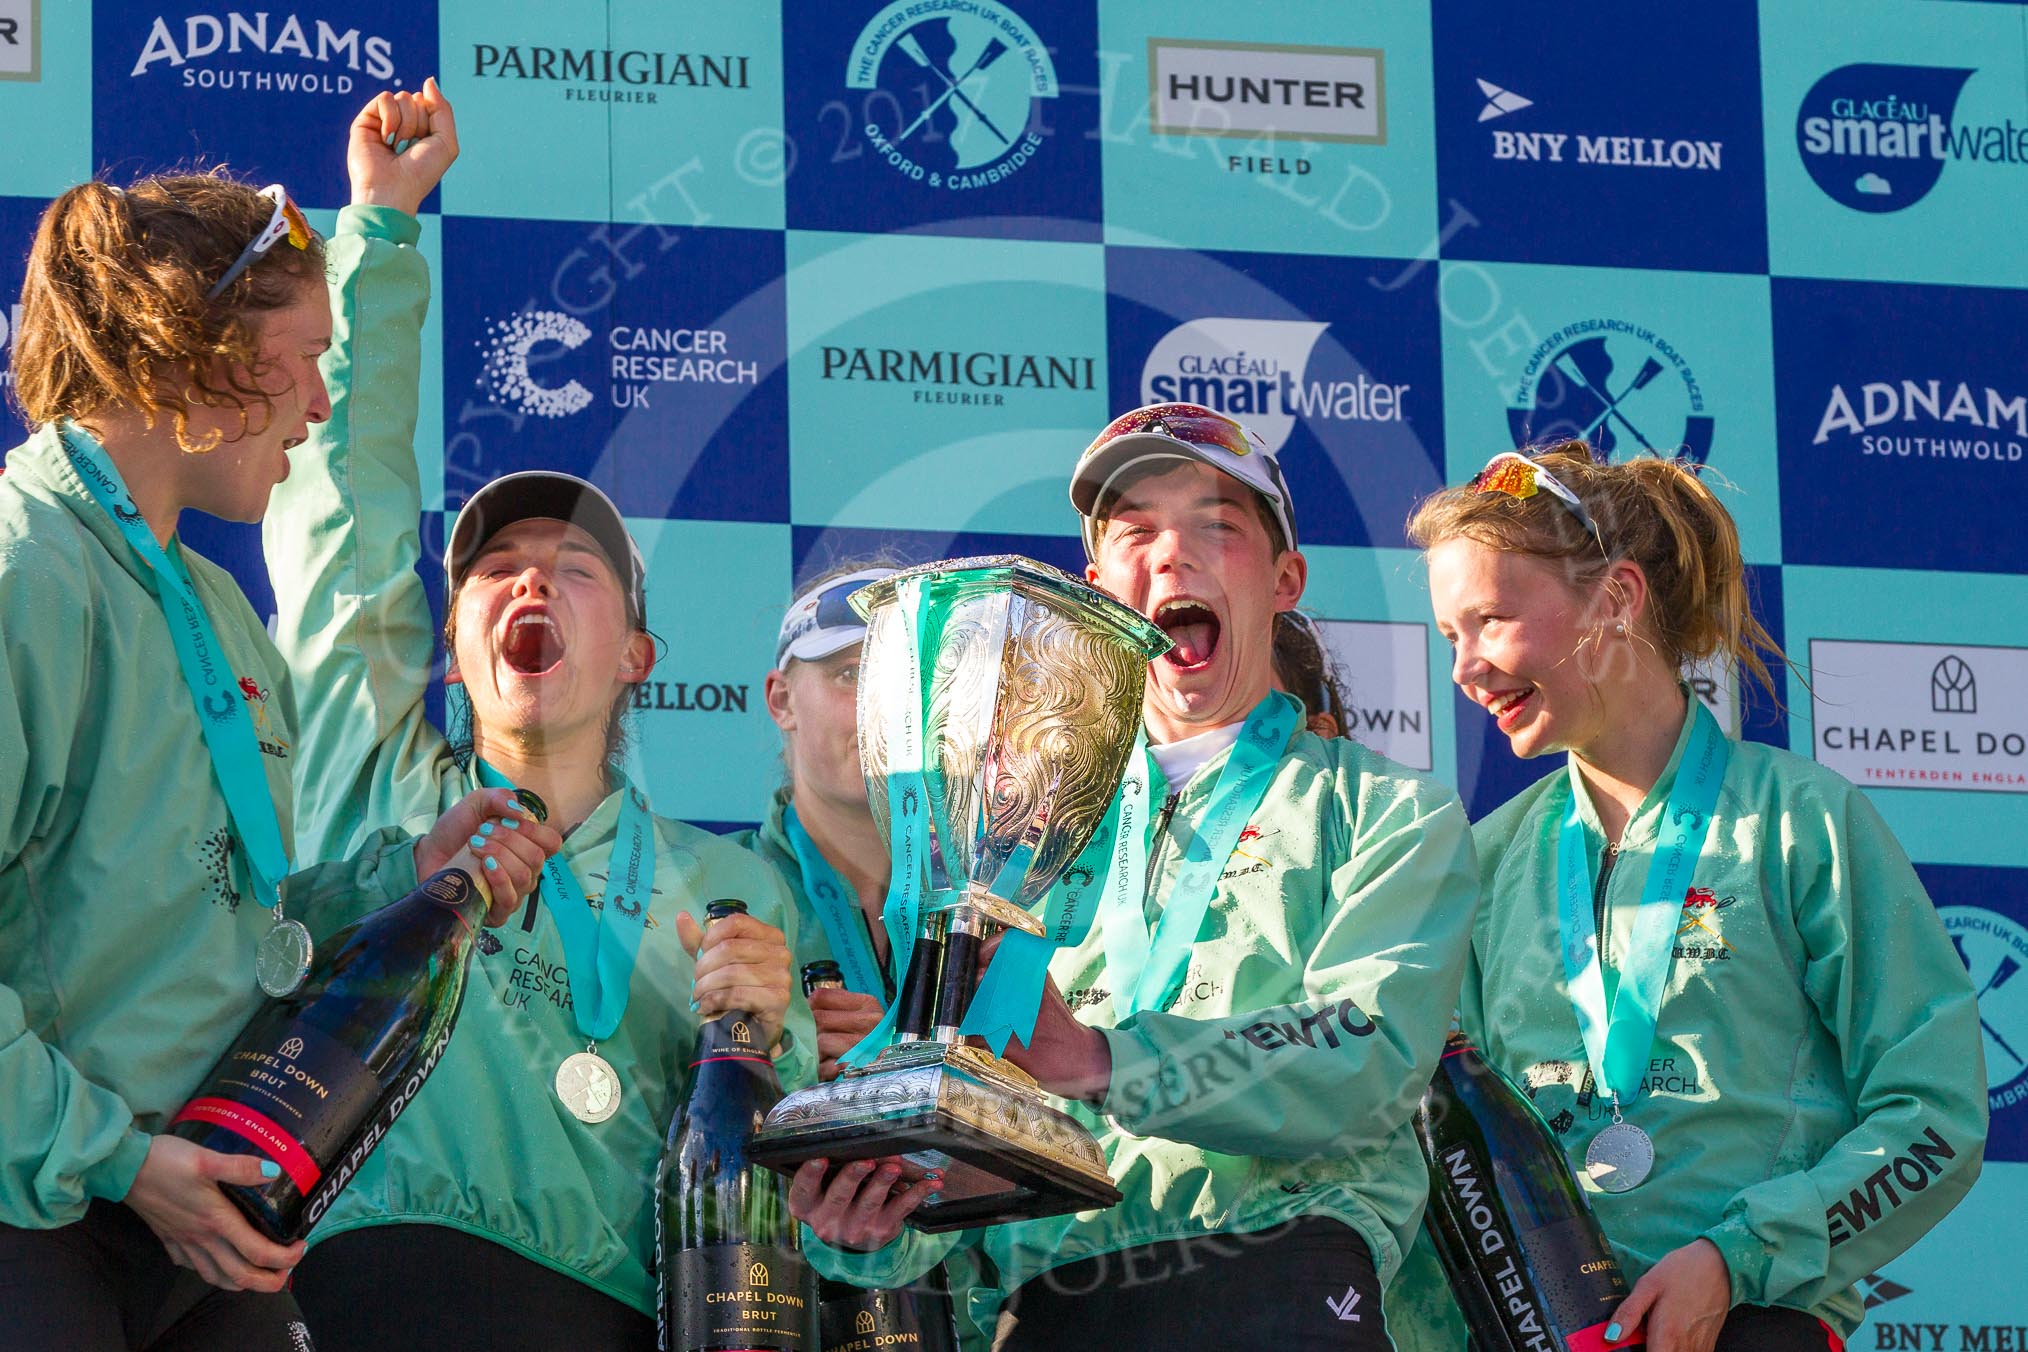 The Boat Race season 2017 -  The Cancer Research Women's Boat Race: CUWBC with the Womwn's Boat Race trophy at the price giving - and a very excited cox Matthew Holland with the Women's Boat Race trophy.
River Thames between Putney Bridge and Mortlake,
London SW15,

United Kingdom,
on 02 April 2017 at 17:14, image #299